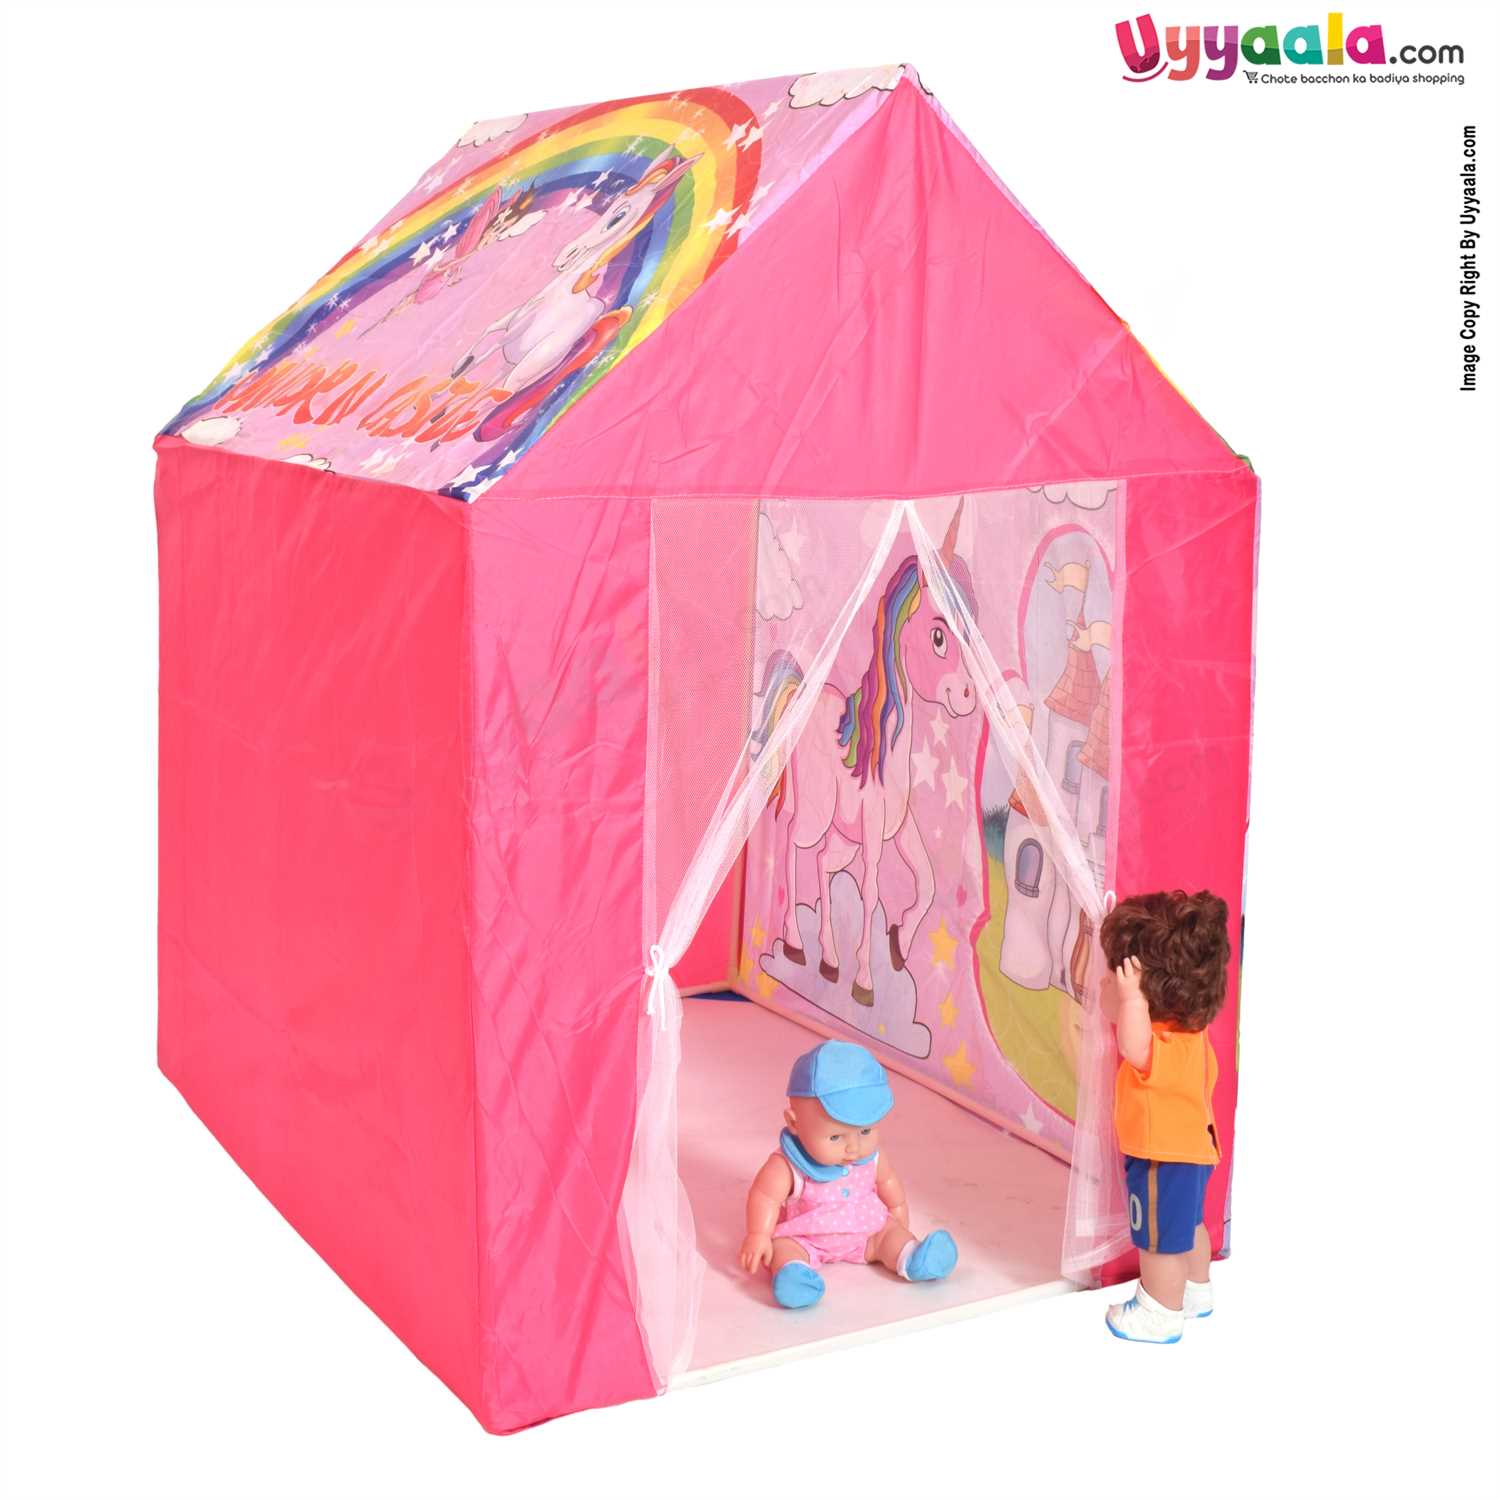 Light weight waterproof play house for kids